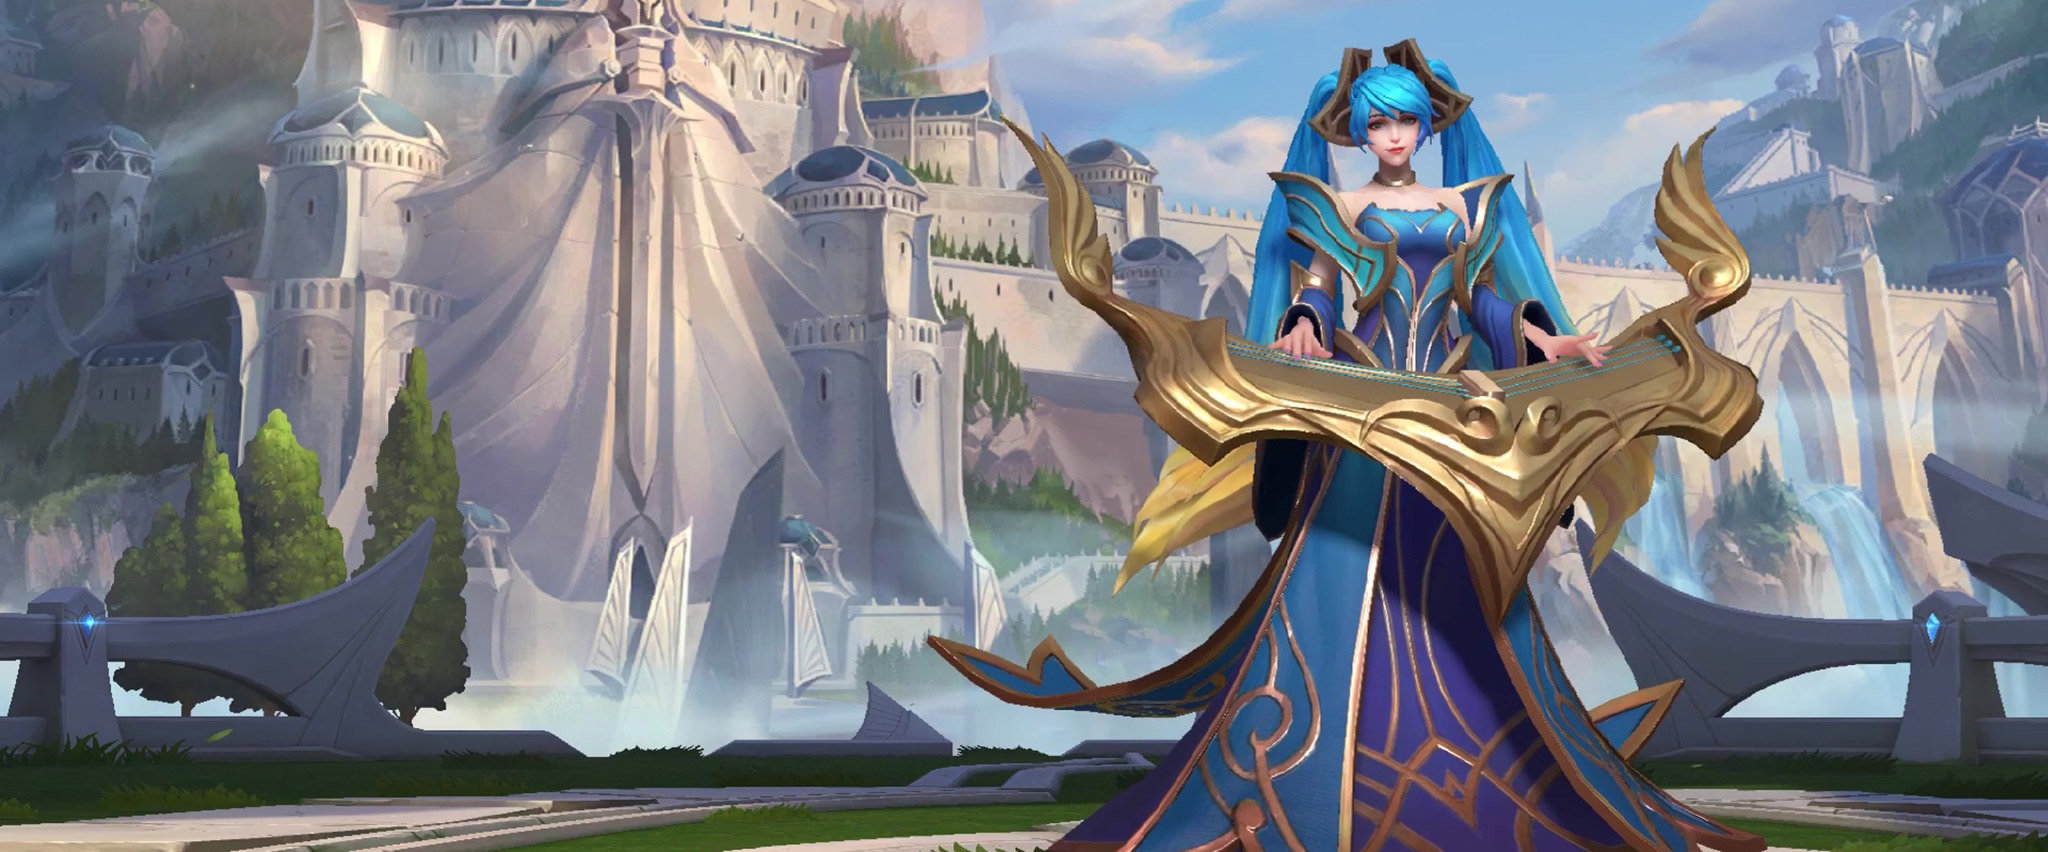 Sona-Maven of the Strings-courage-energy-League Of Legends-Game-Fantasy  Girls Wallpapers-1920x1200 : Wallpapers13.com